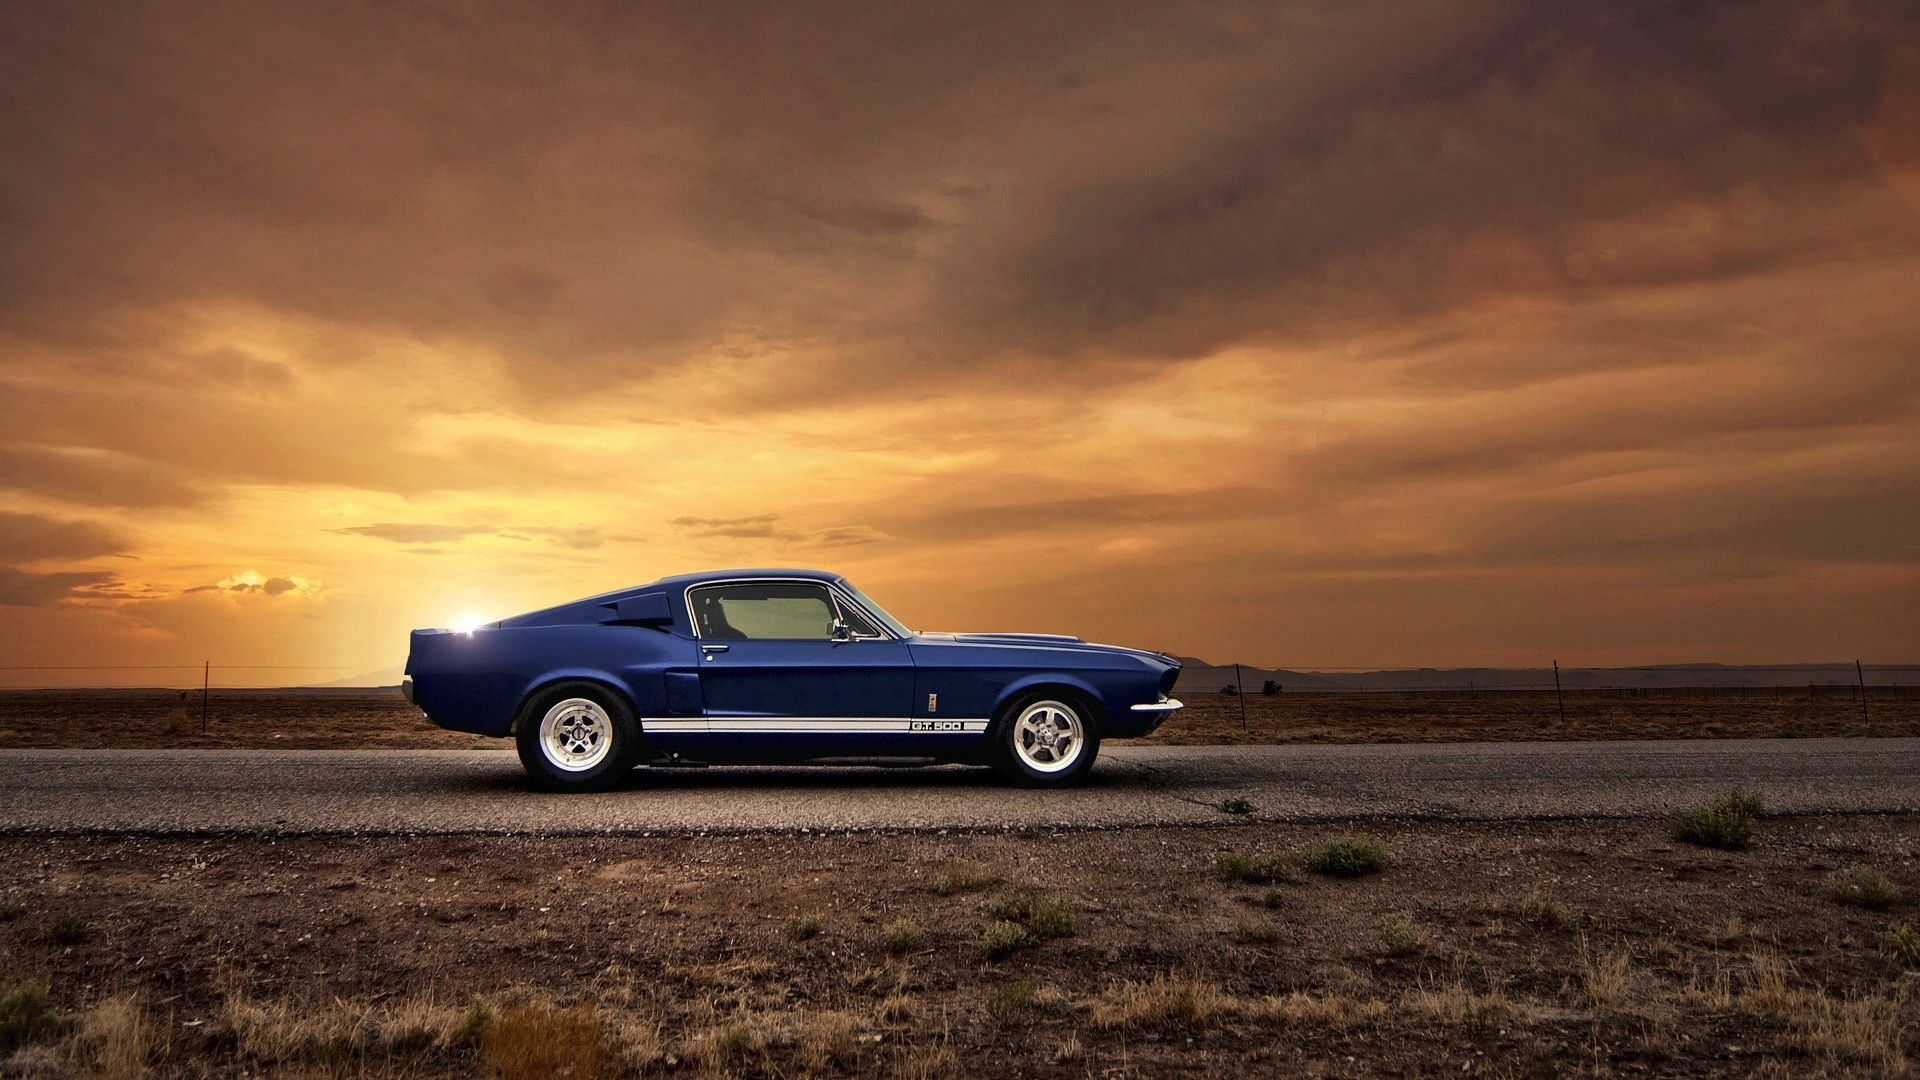 1920x1080 Images Of American Muscle Cars